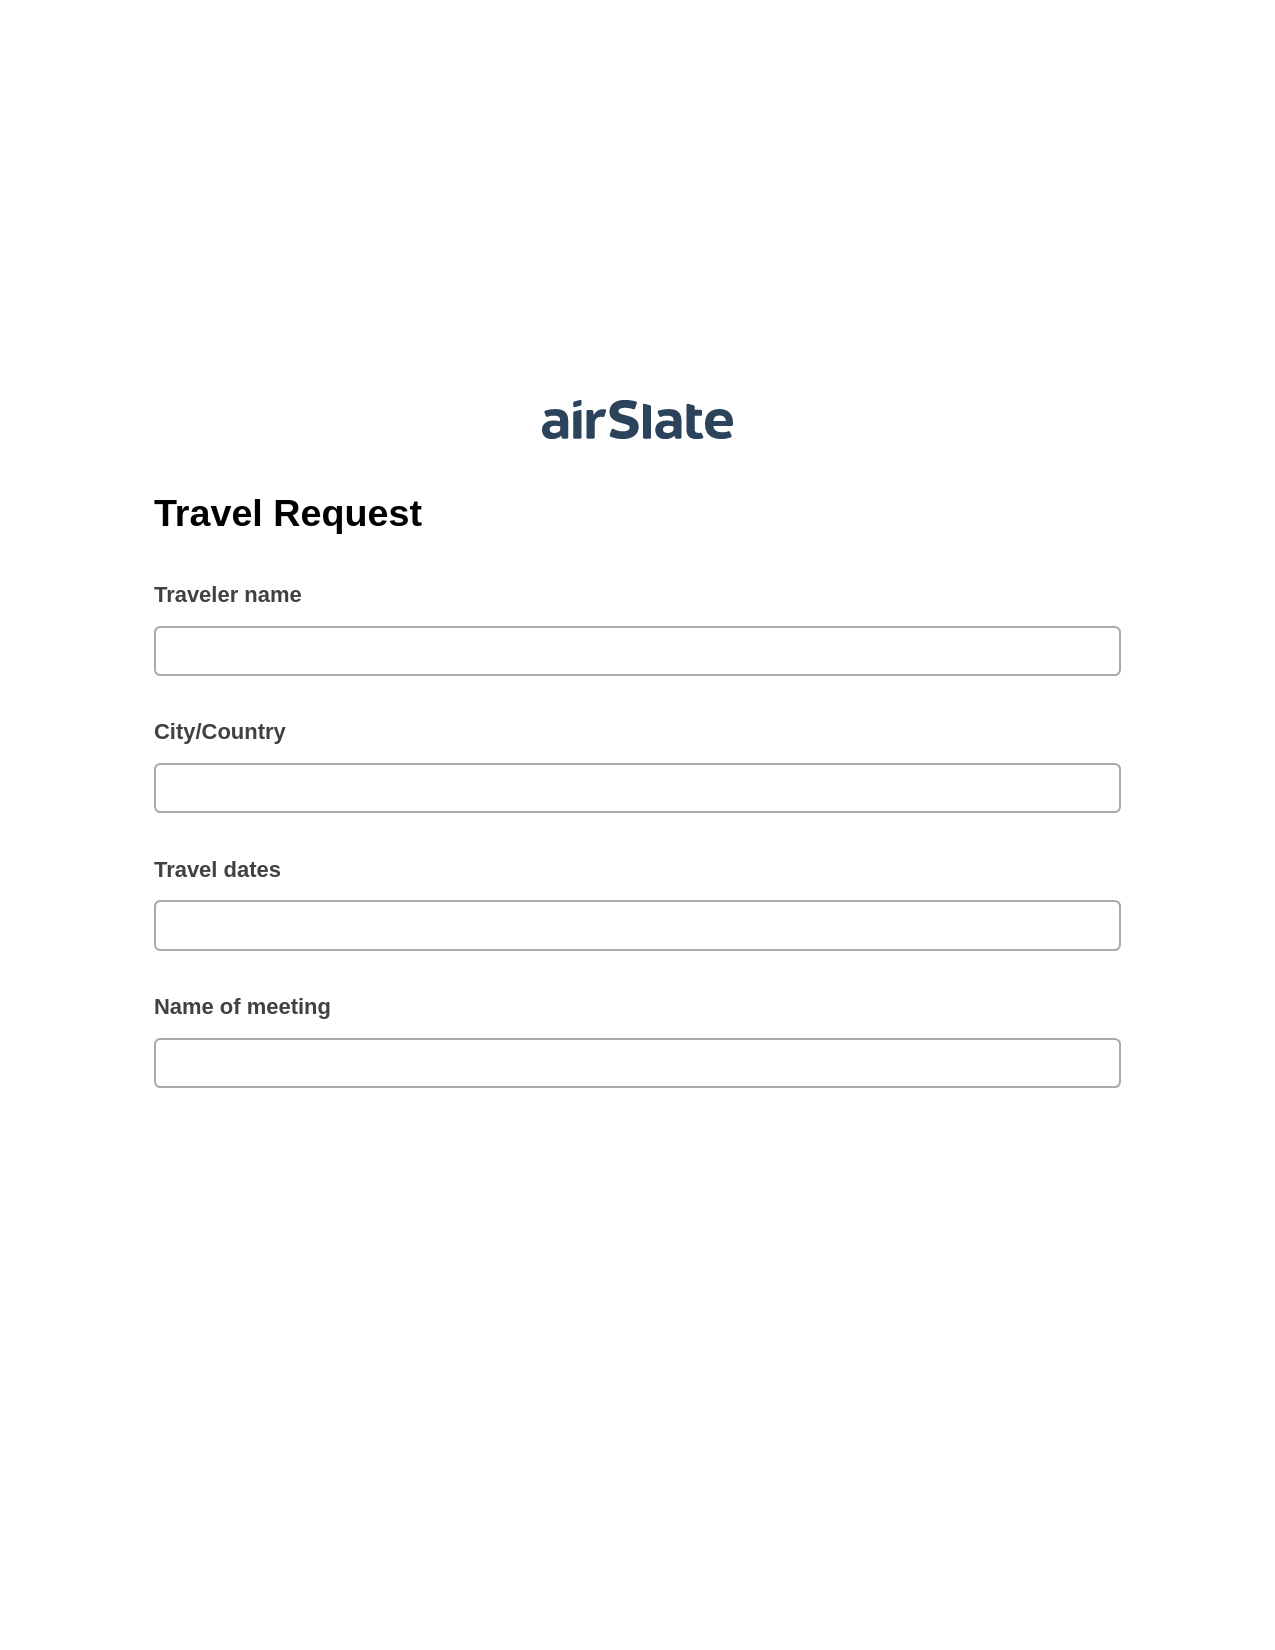 Travel Request Pre-fill from another Slate Bot, Create Slate Reminder Bot, Export to Smartsheet